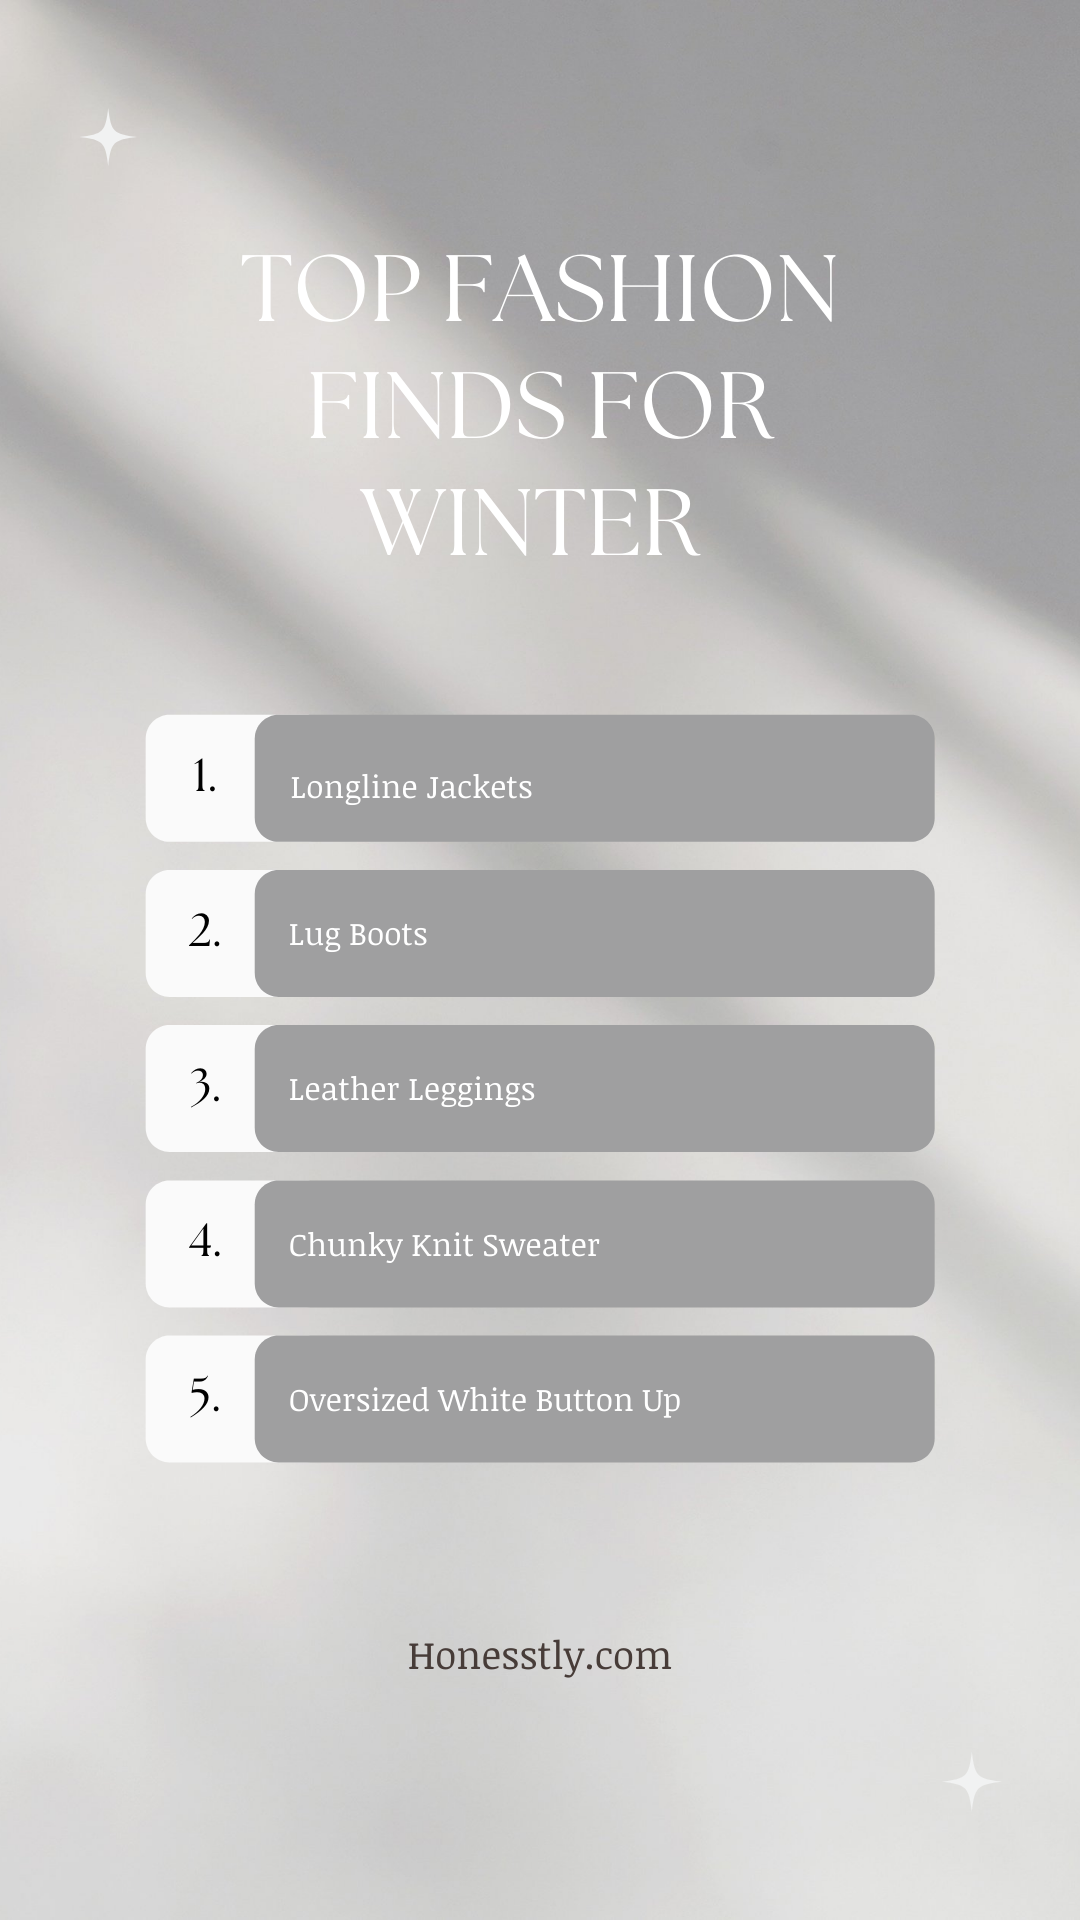 Top Winter Fashion Finds